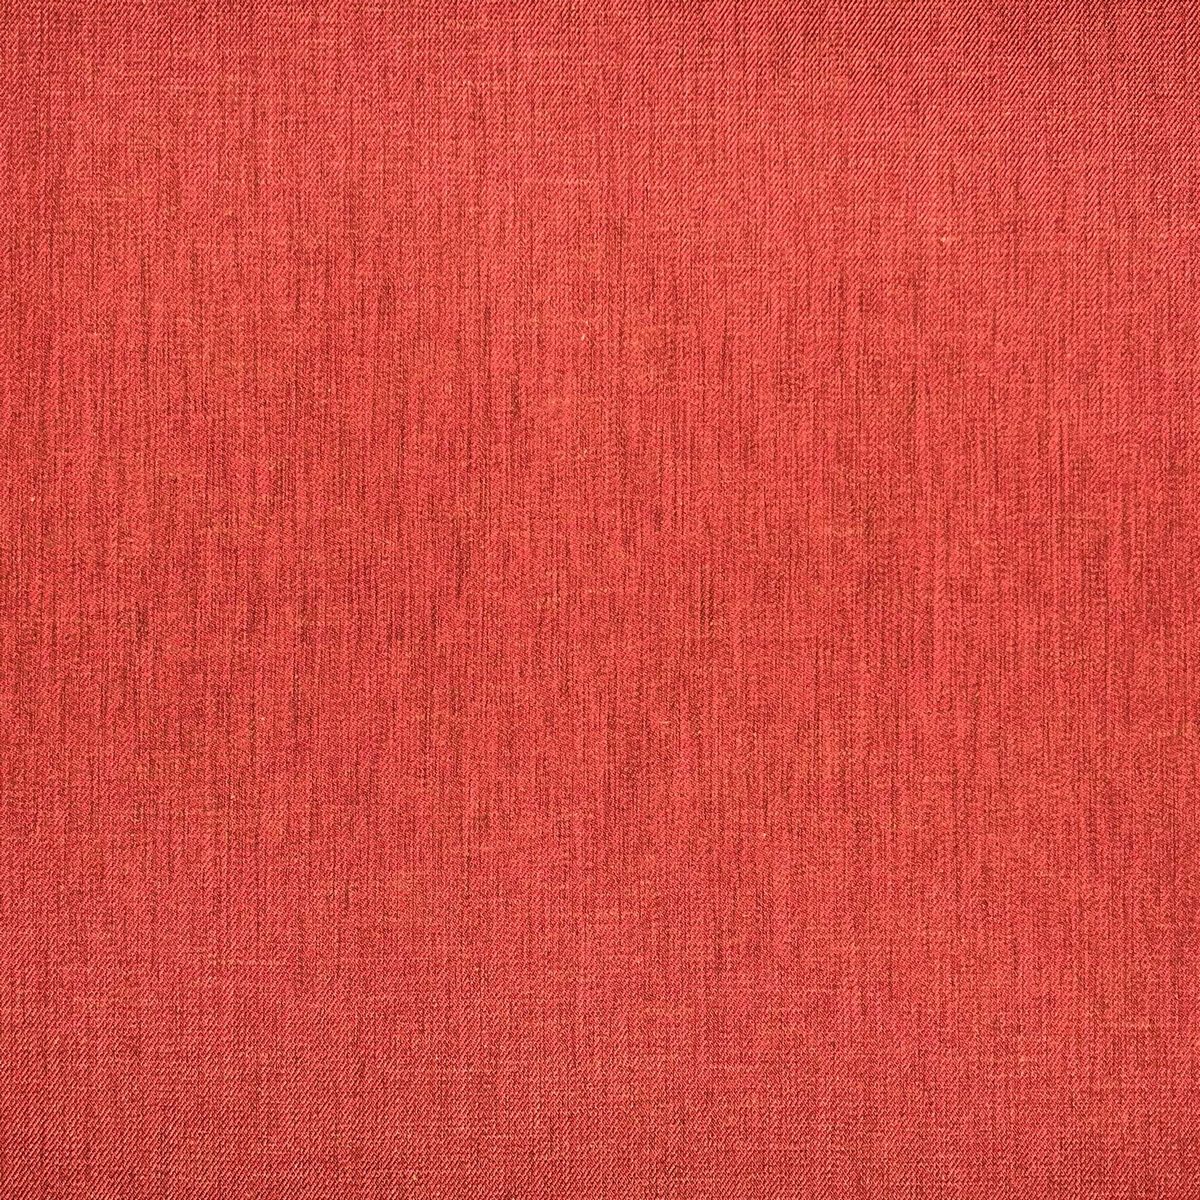 Moda Persian Red Fabric by Chatham Glyn